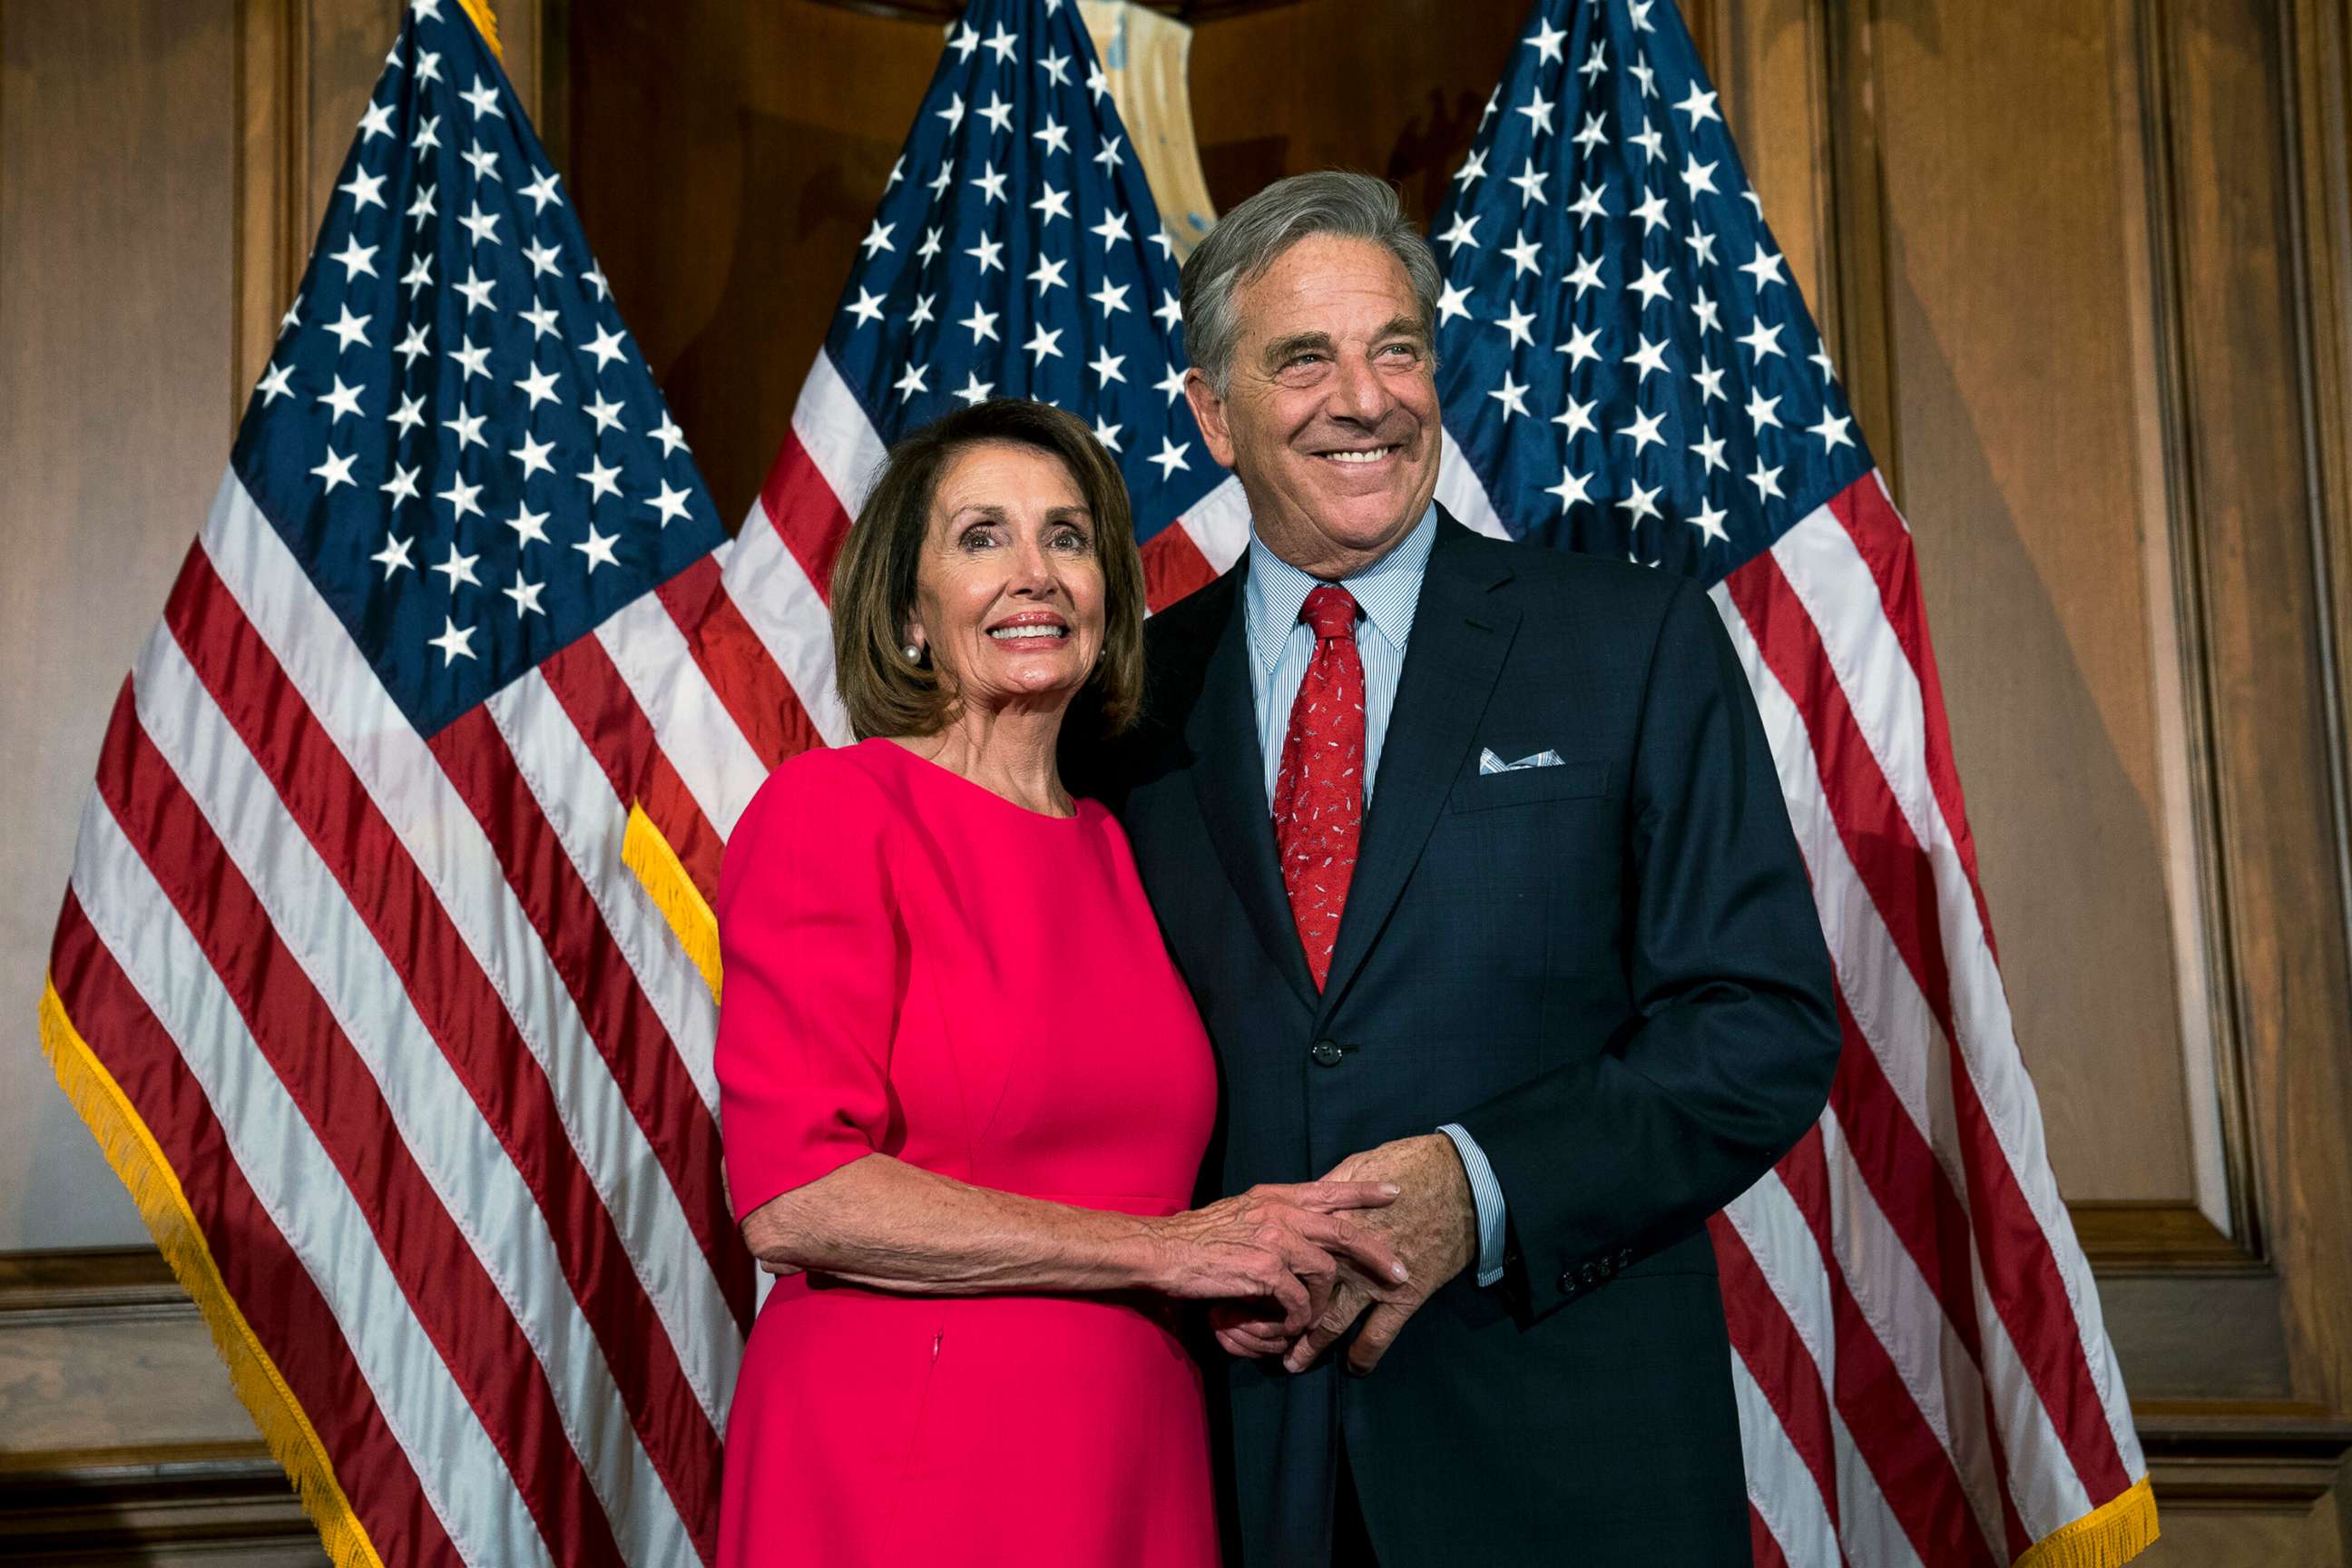 PHOTO: In this Jan. 3, 2019, file photo, House Speaker Nancy Pelosi stands with her husband, Paul Pelosi, during the ceremonial swearing-in of the 116th Congress in the Rayburn Room of the U.S. Capitol in Washington, D.C.